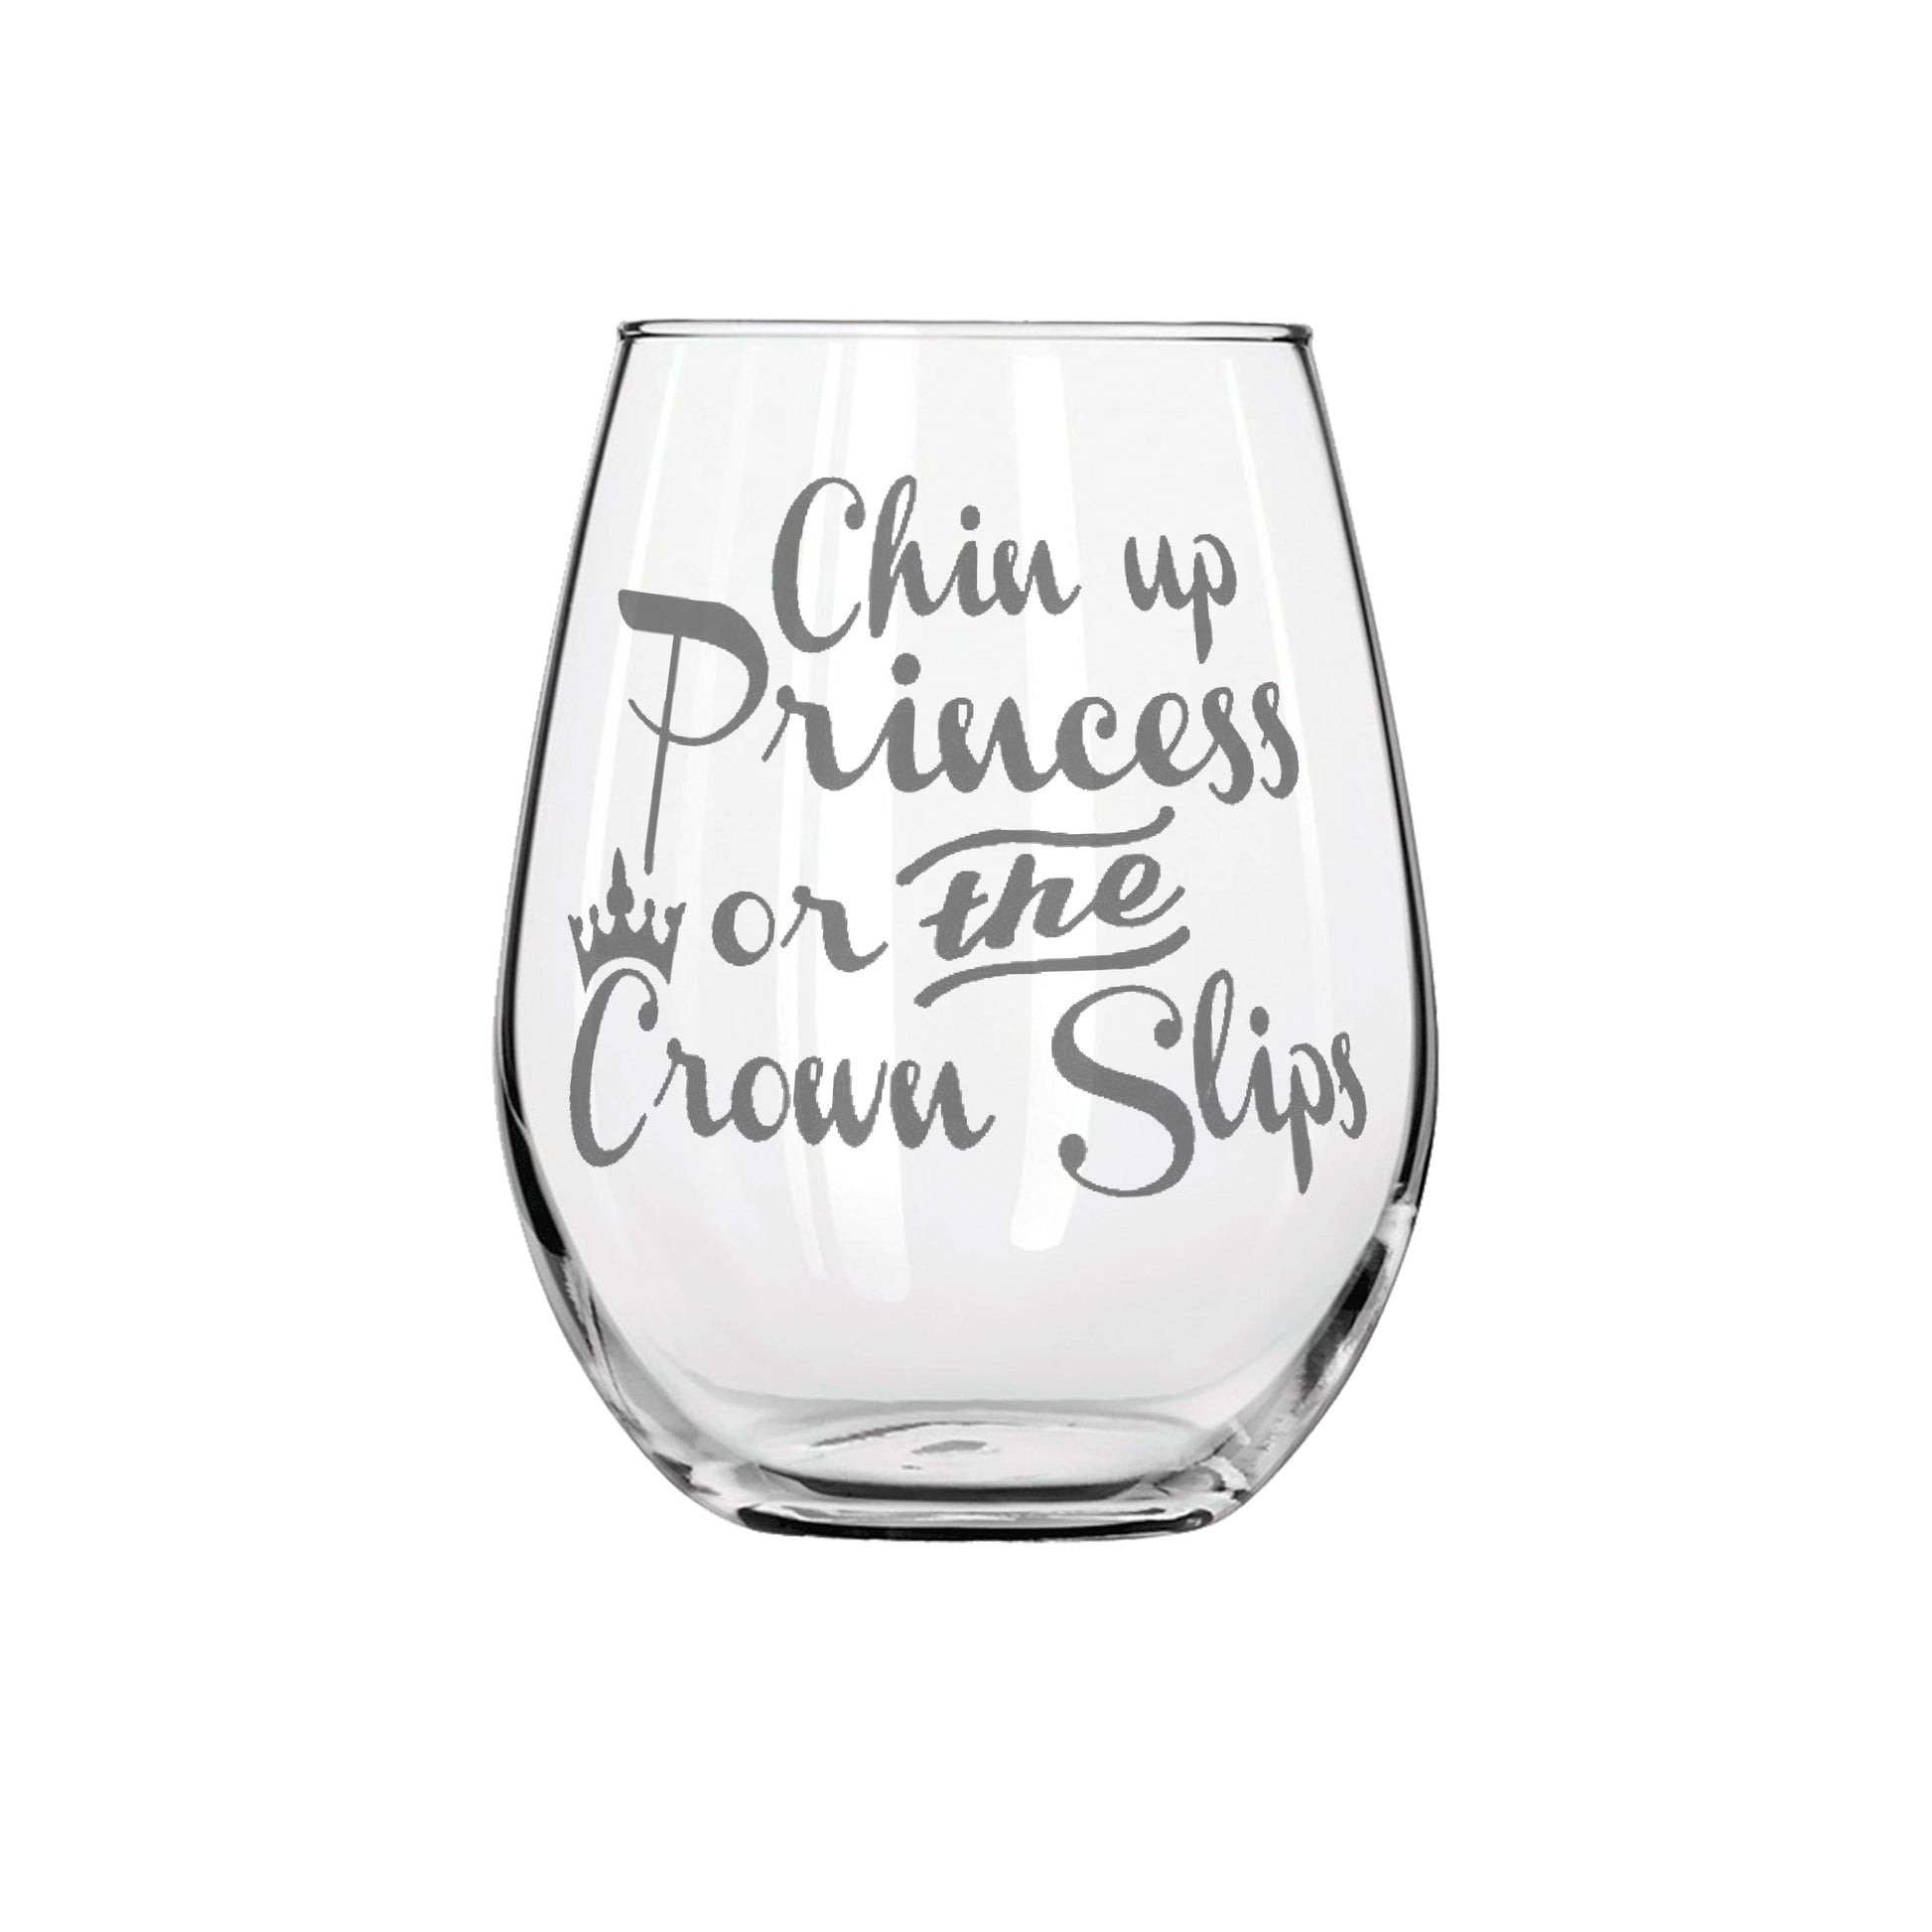 Chin Up Princess or the Crown Slips Etched Stemless Wine Glass 20.5oz - Expressive DeZien 